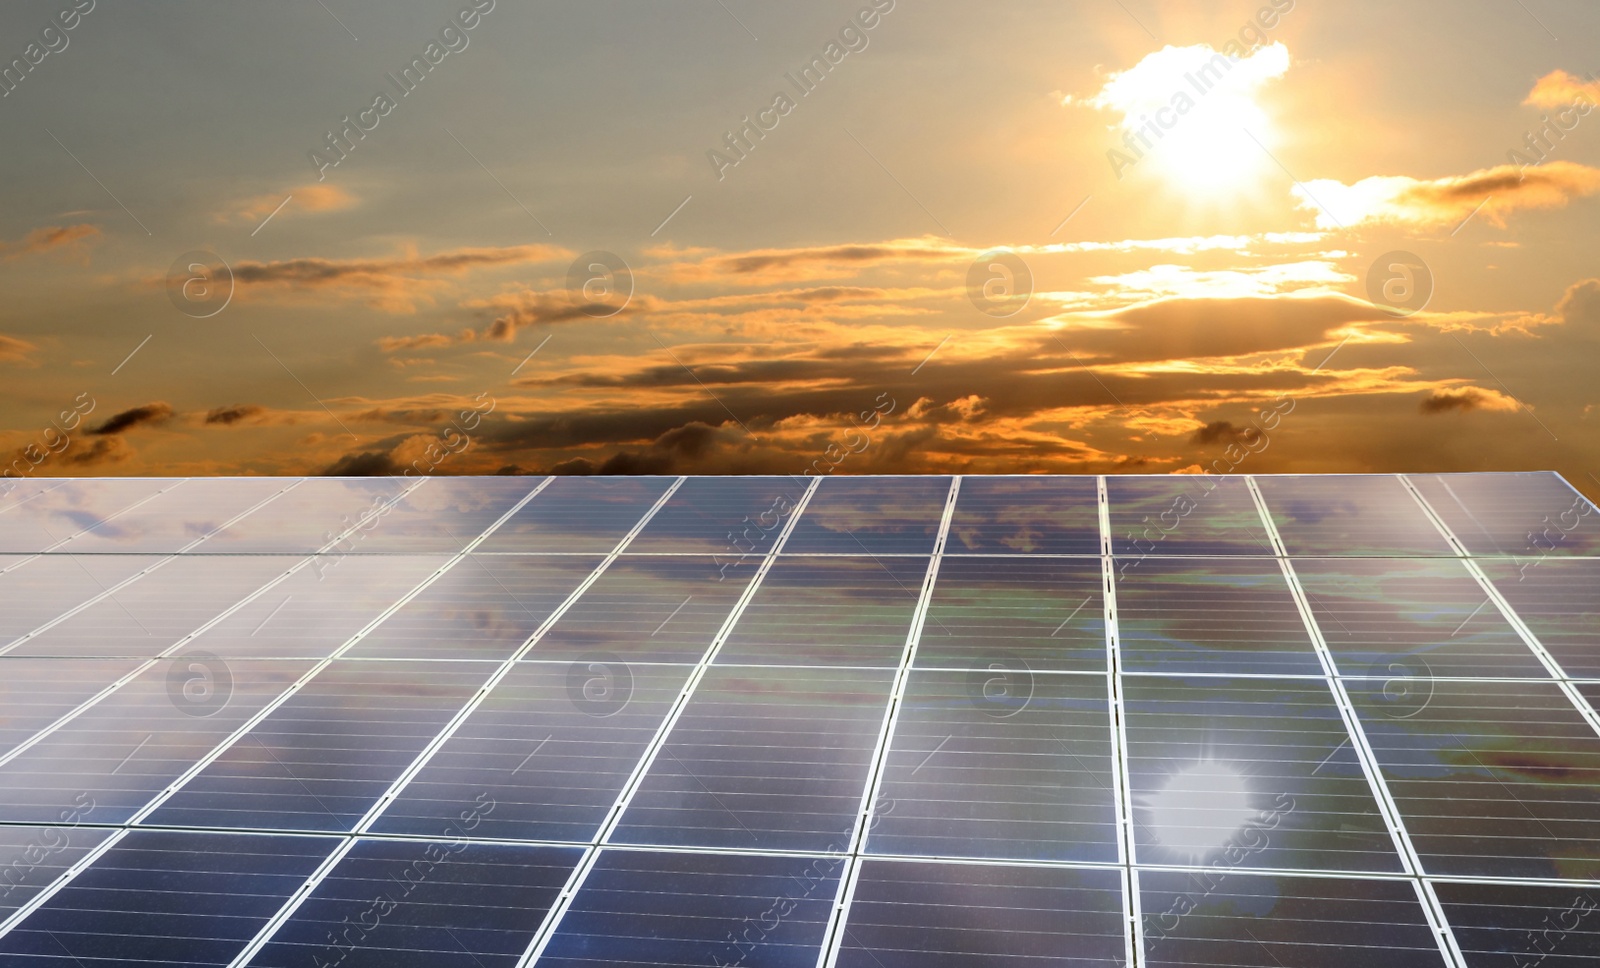 Image of Solar panels installed outdoors. Alternative energy source